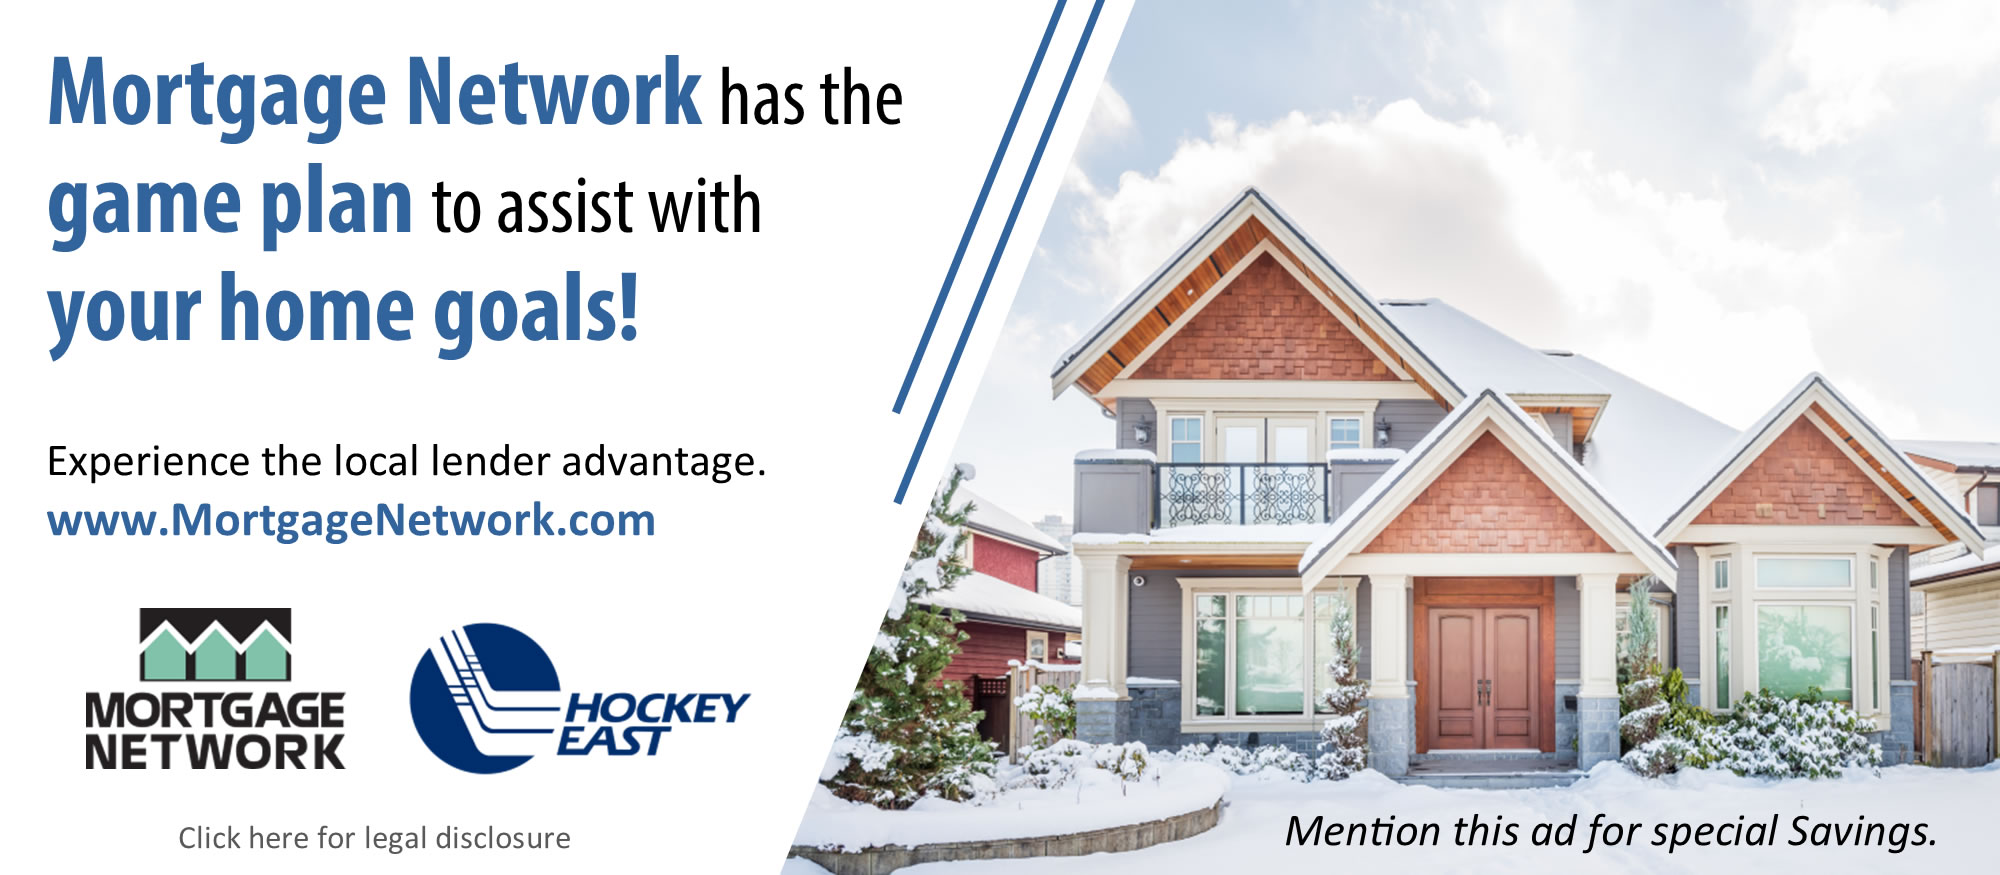 Mortgage Network